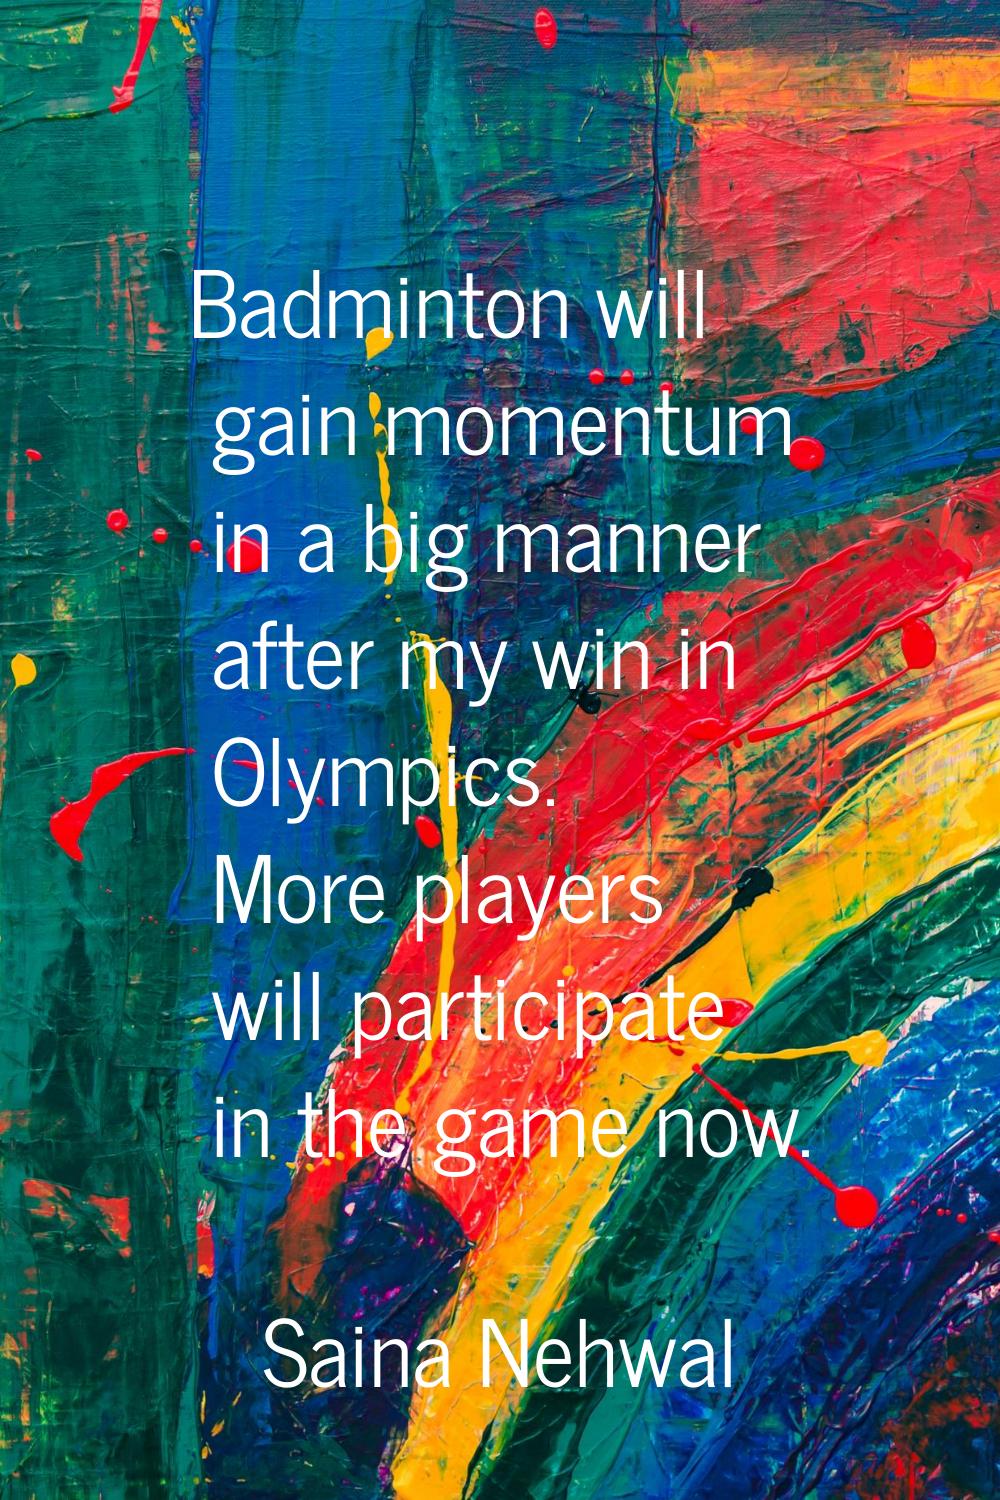 Badminton will gain momentum in a big manner after my win in Olympics. More players will participat